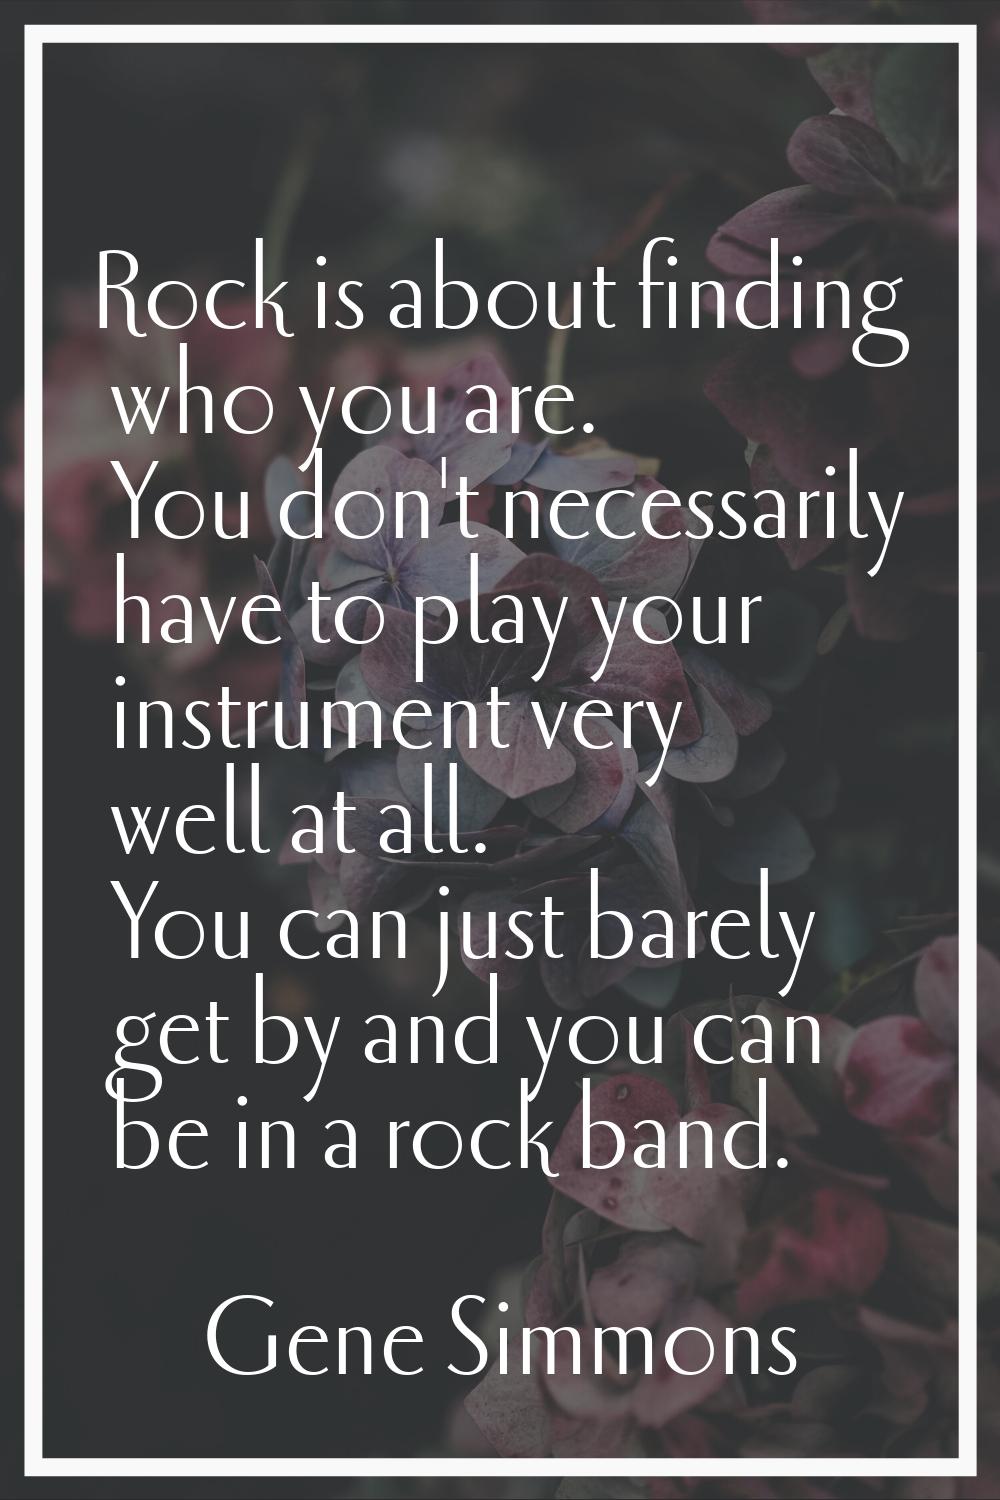 Rock is about finding who you are. You don't necessarily have to play your instrument very well at 